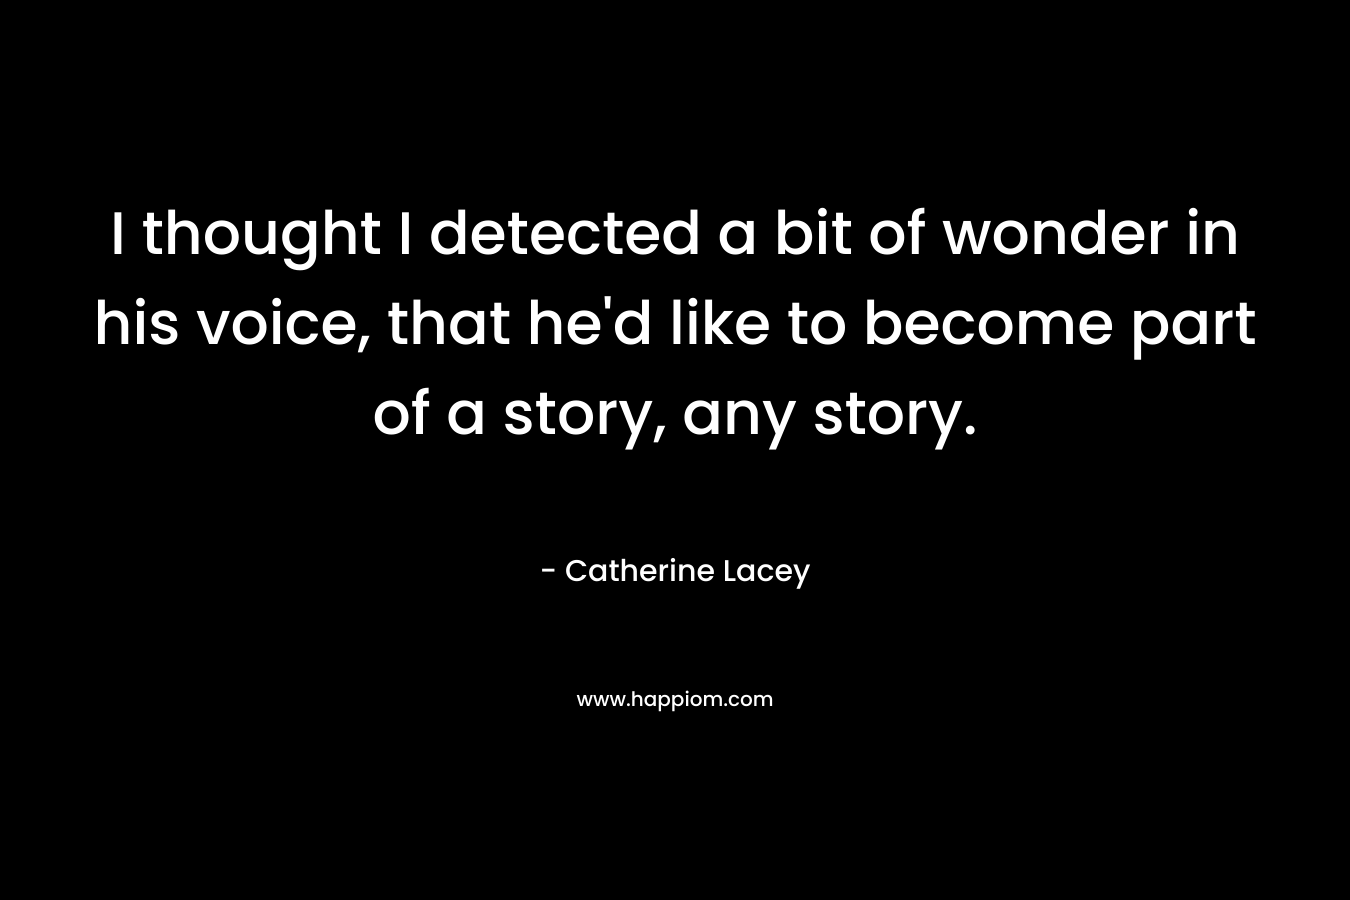 I thought I detected a bit of wonder in his voice, that he’d like to become part of a story, any story. – Catherine Lacey